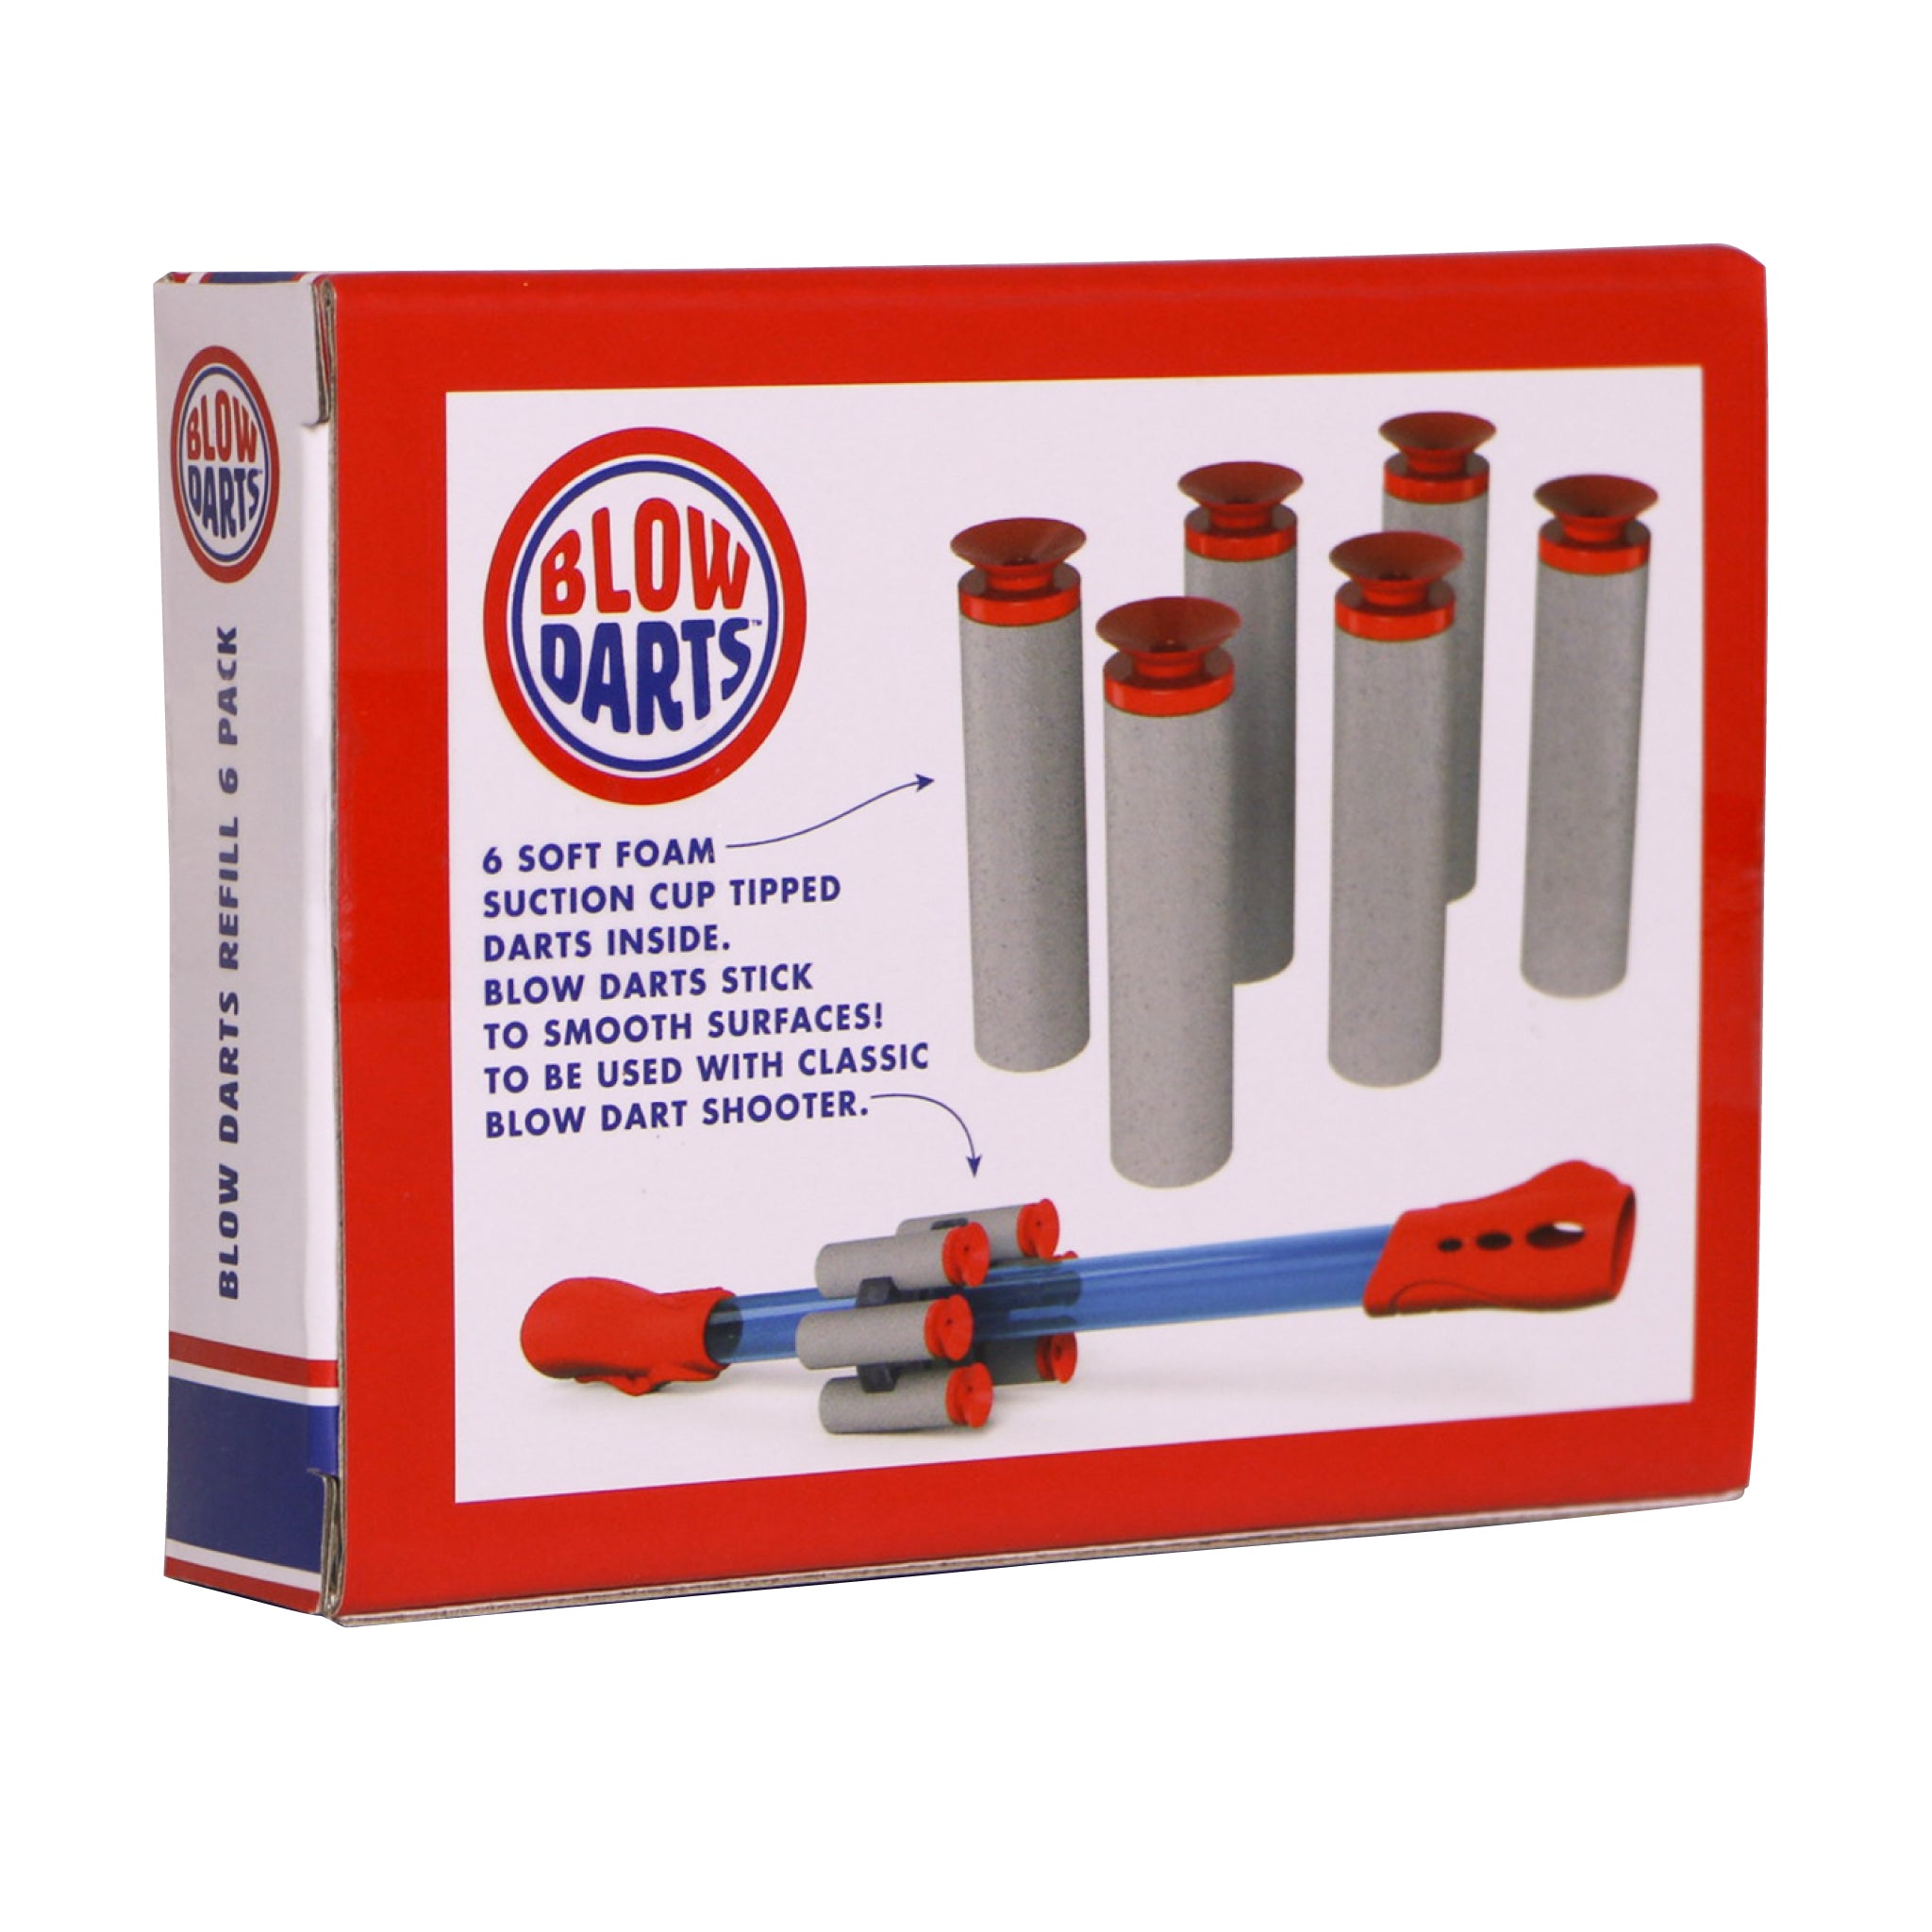 Refill Darts for Blow Darts target set by Mighty Fun! 6 foam darts in each color gift box.